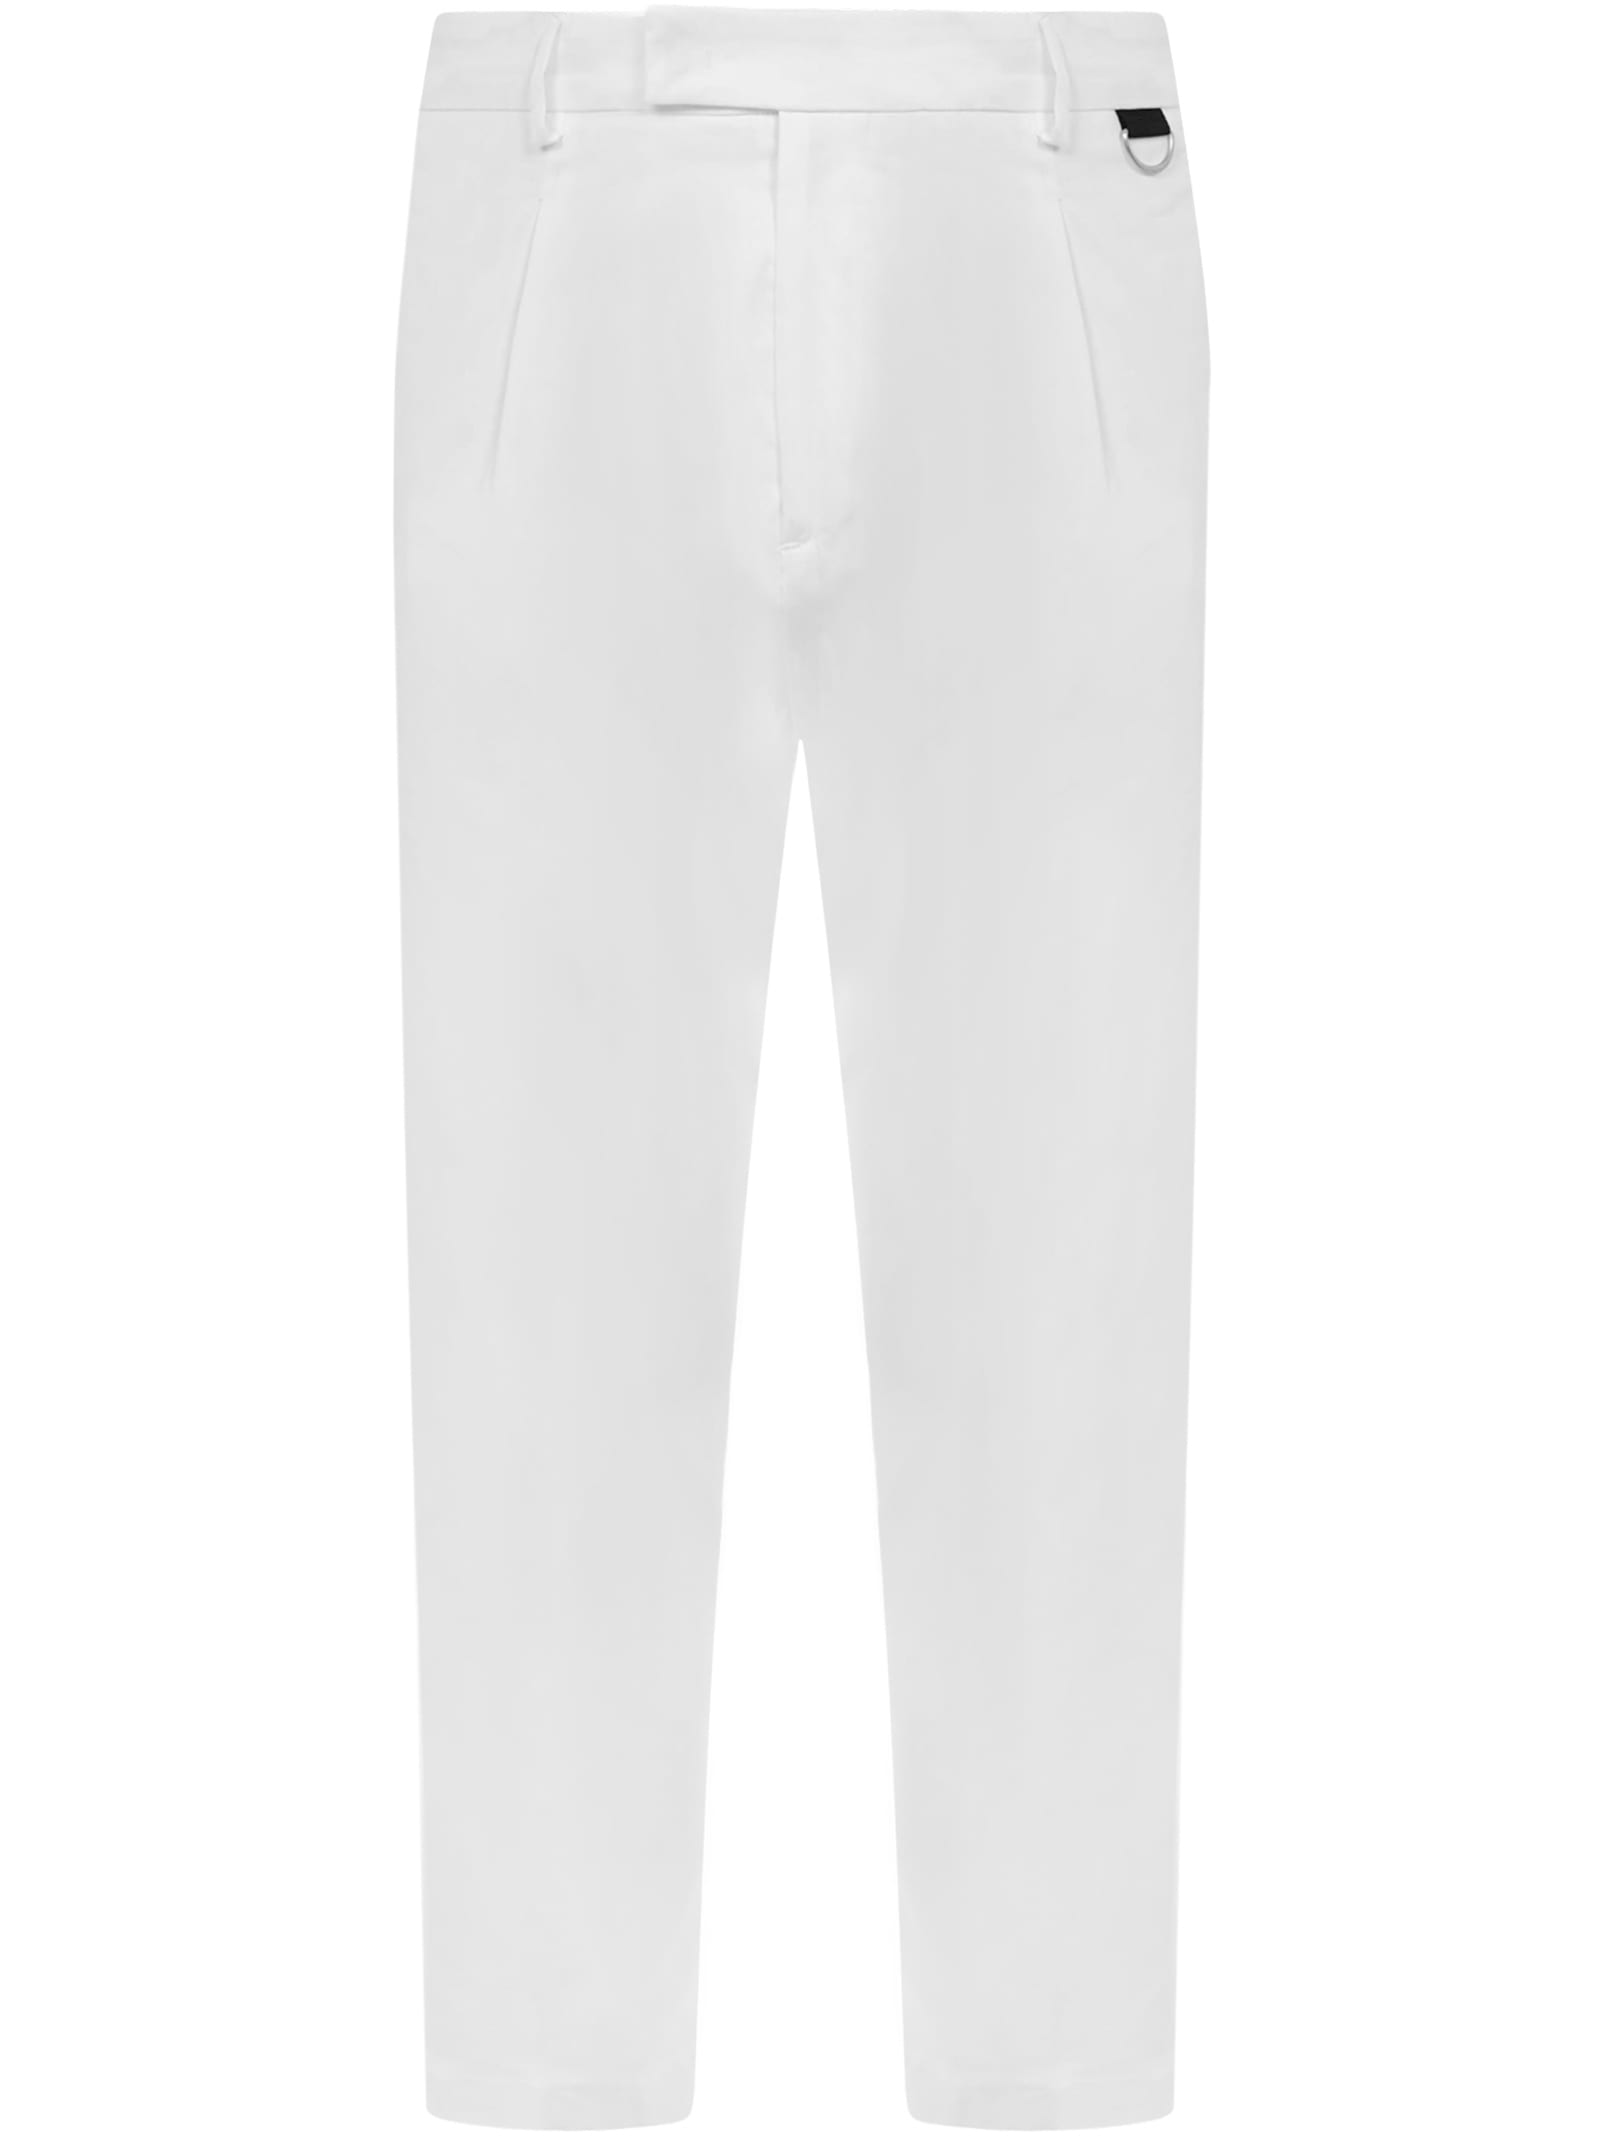 LOW BRAND TROUSERS,L1PSS215693 A001